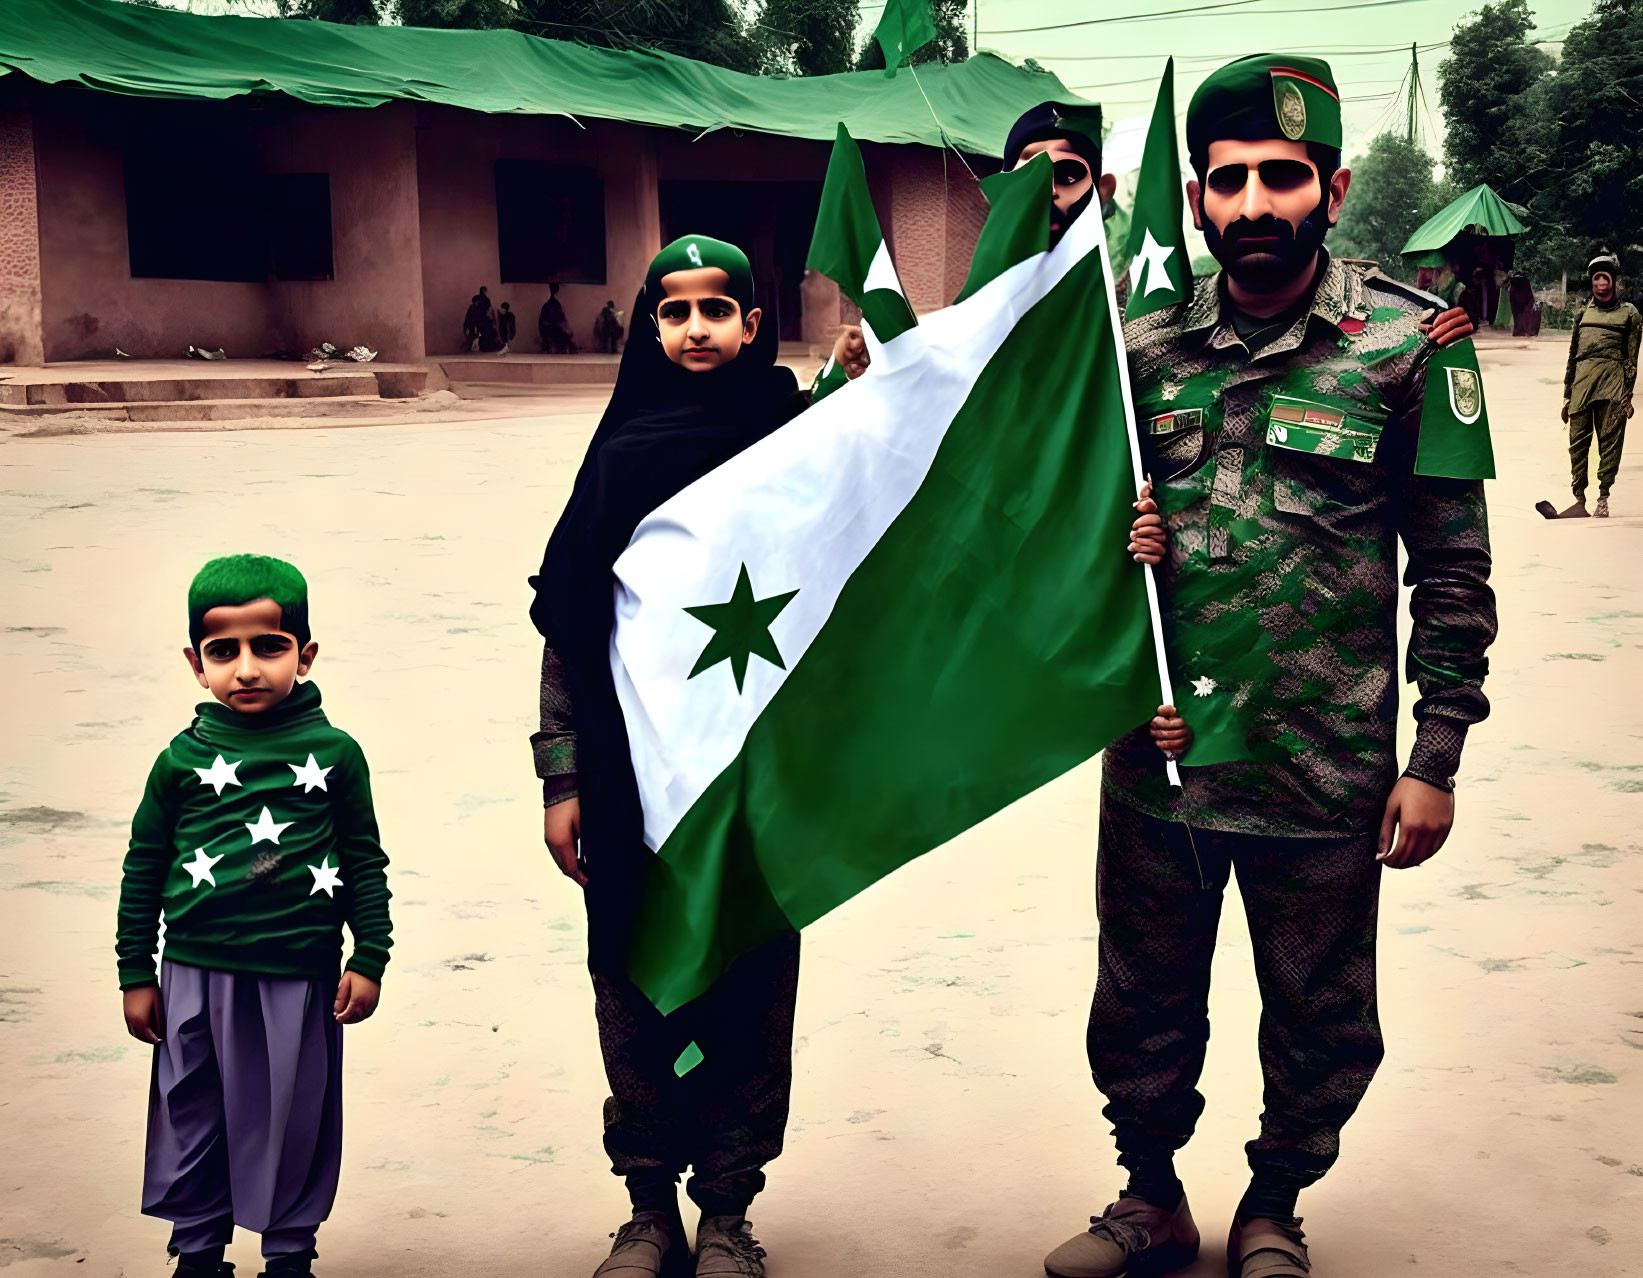 Group of uniformed individuals with child holding Pakistan flag in patriotic setting